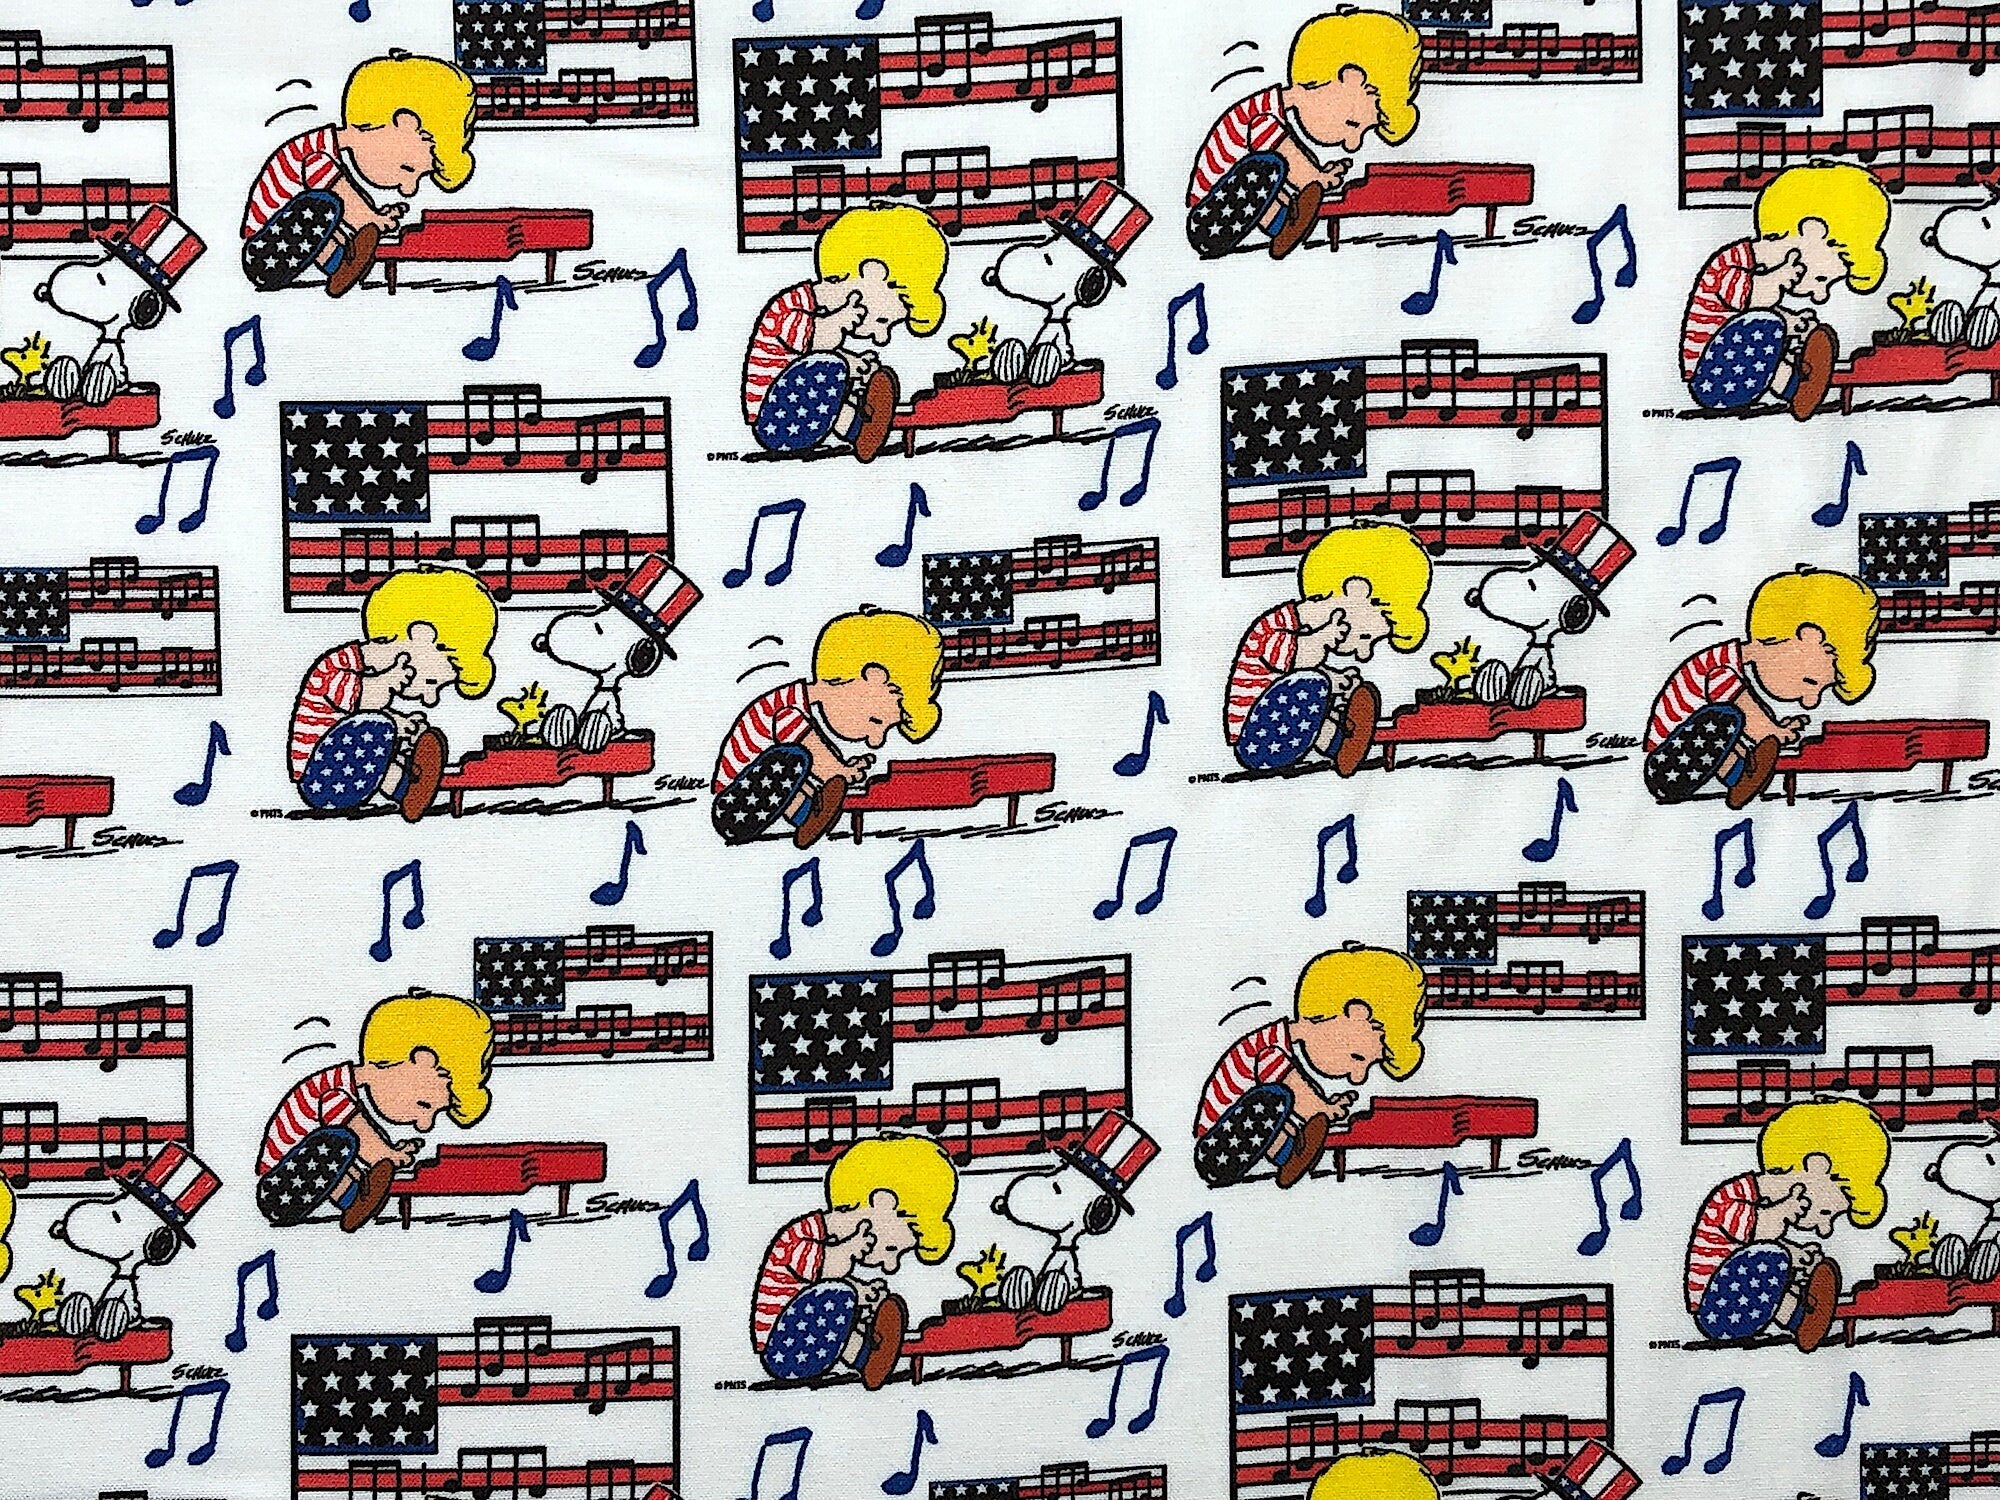 This fabric is called Linus Snoopy Americana and has Snoopy sitting on Linus piano. Linus is playing the piano and there are flags and music notes in the background of this white fabric.